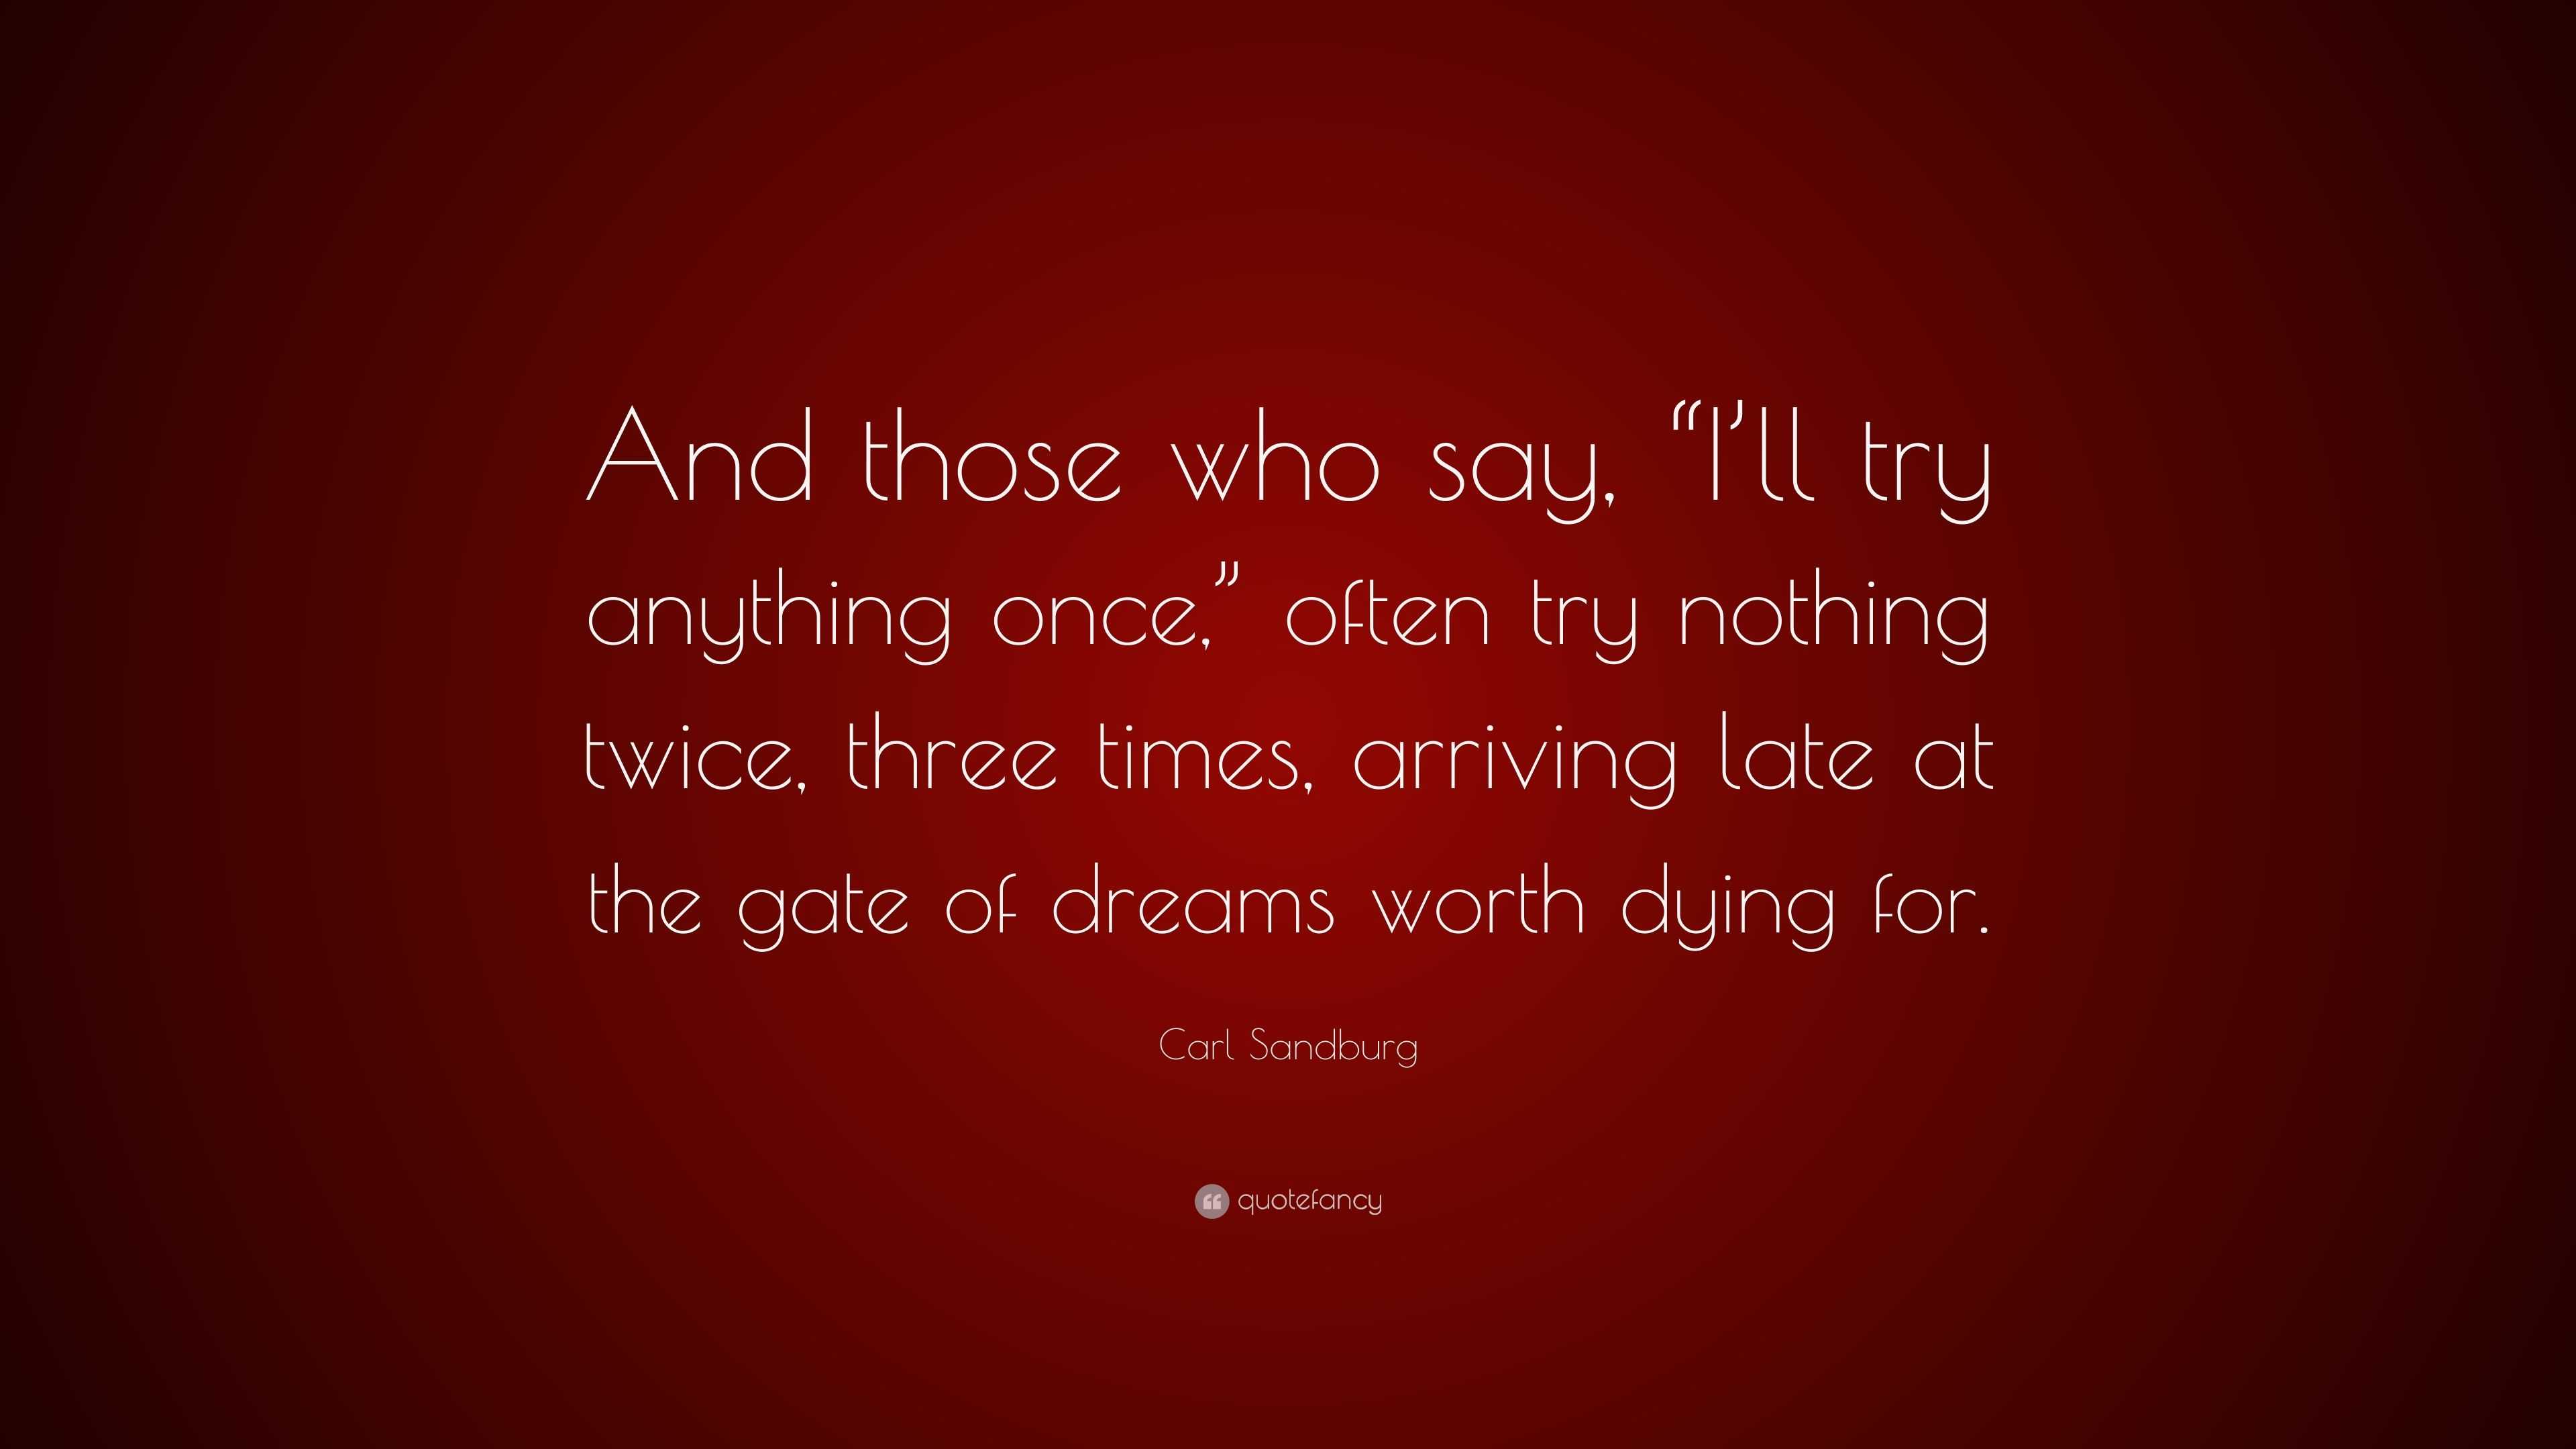 Carl Sandburg Quote: “And those who say, “I’ll try anything once